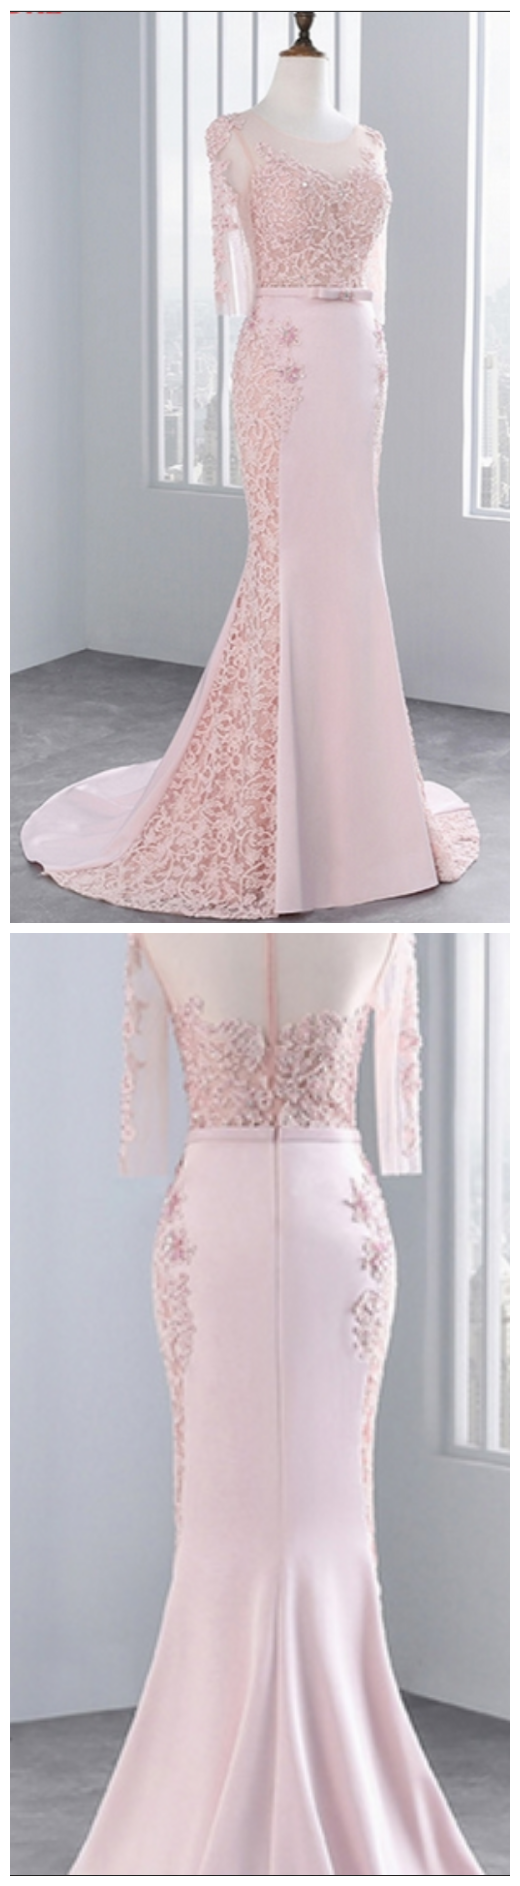 Pink Middle Sleeves, Lace Prom Dresses, Mermaid Party Evening Dress For Graduation,floor Length Formal Dress